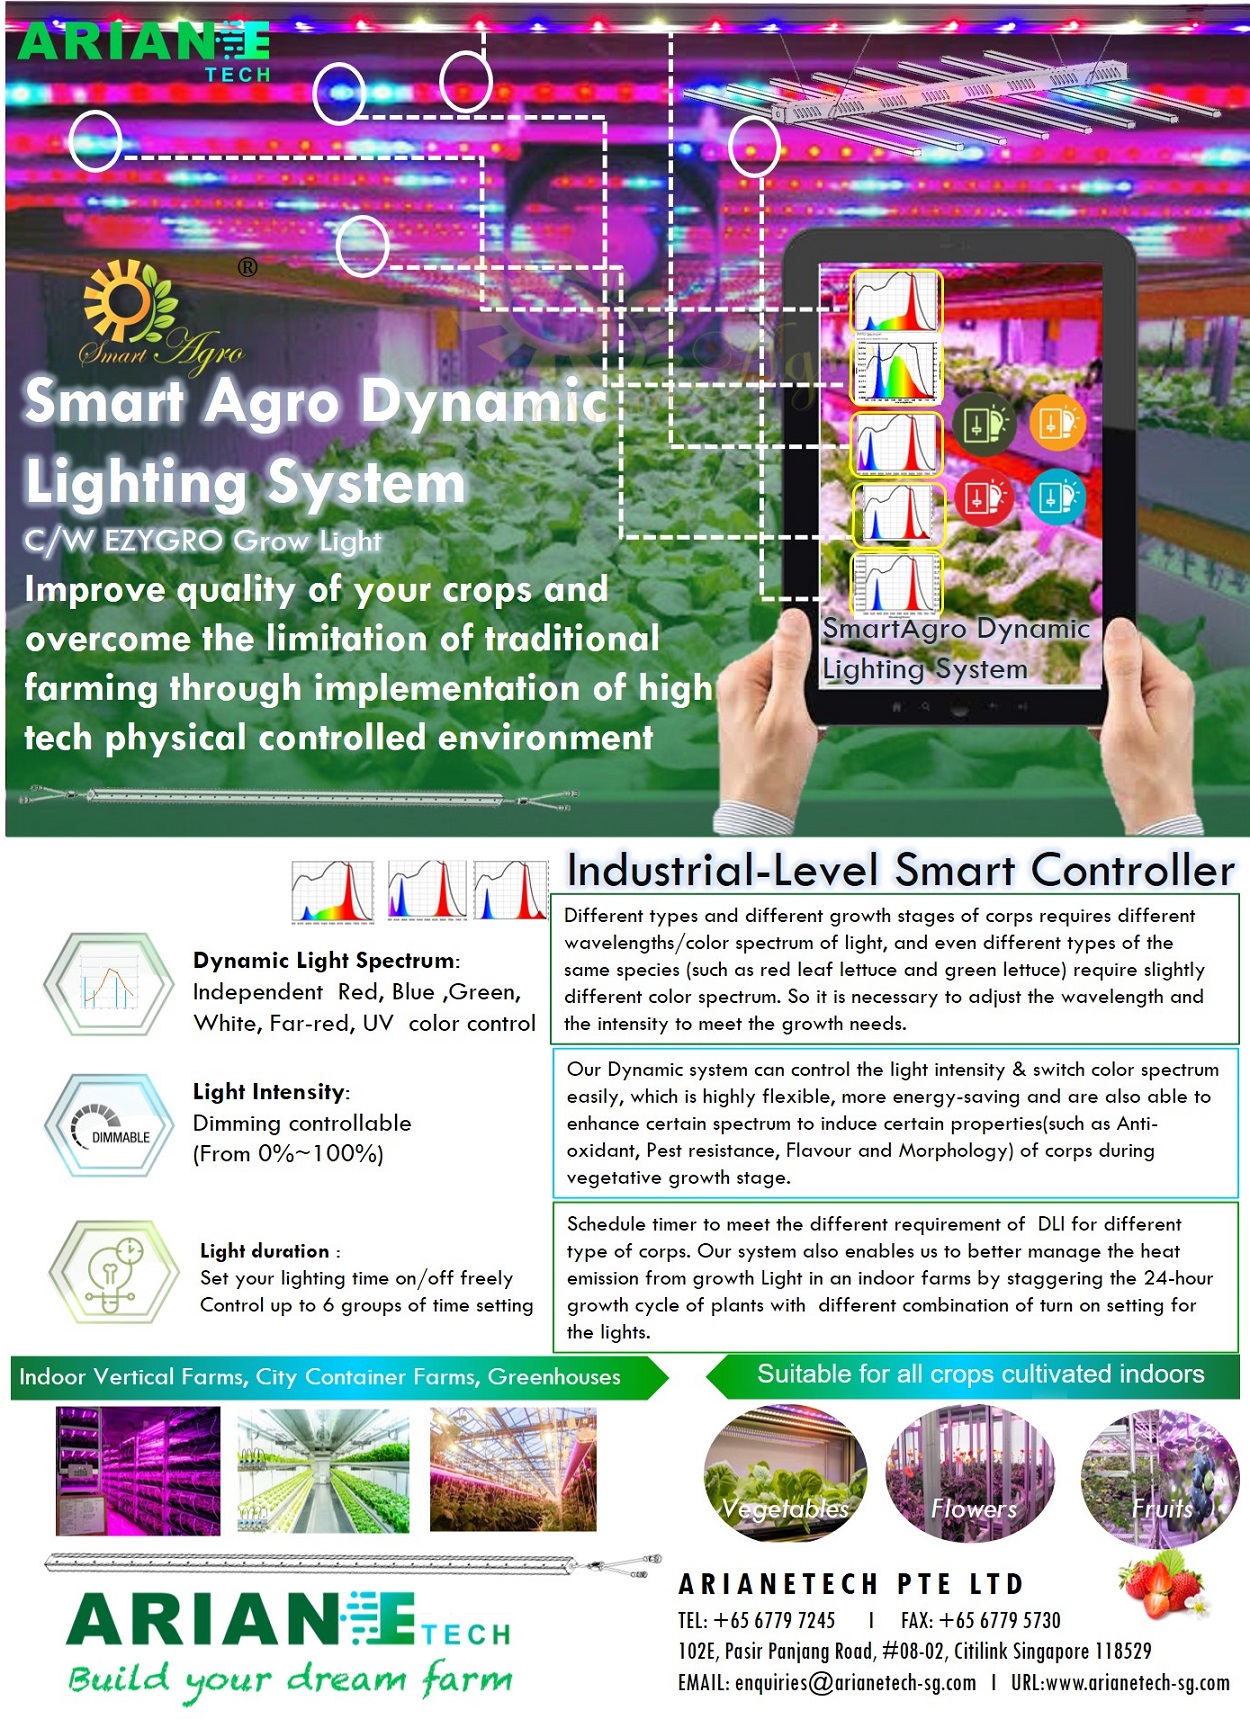 Smart Agro Dynamic Lighting Touch Screen Panel Control System1